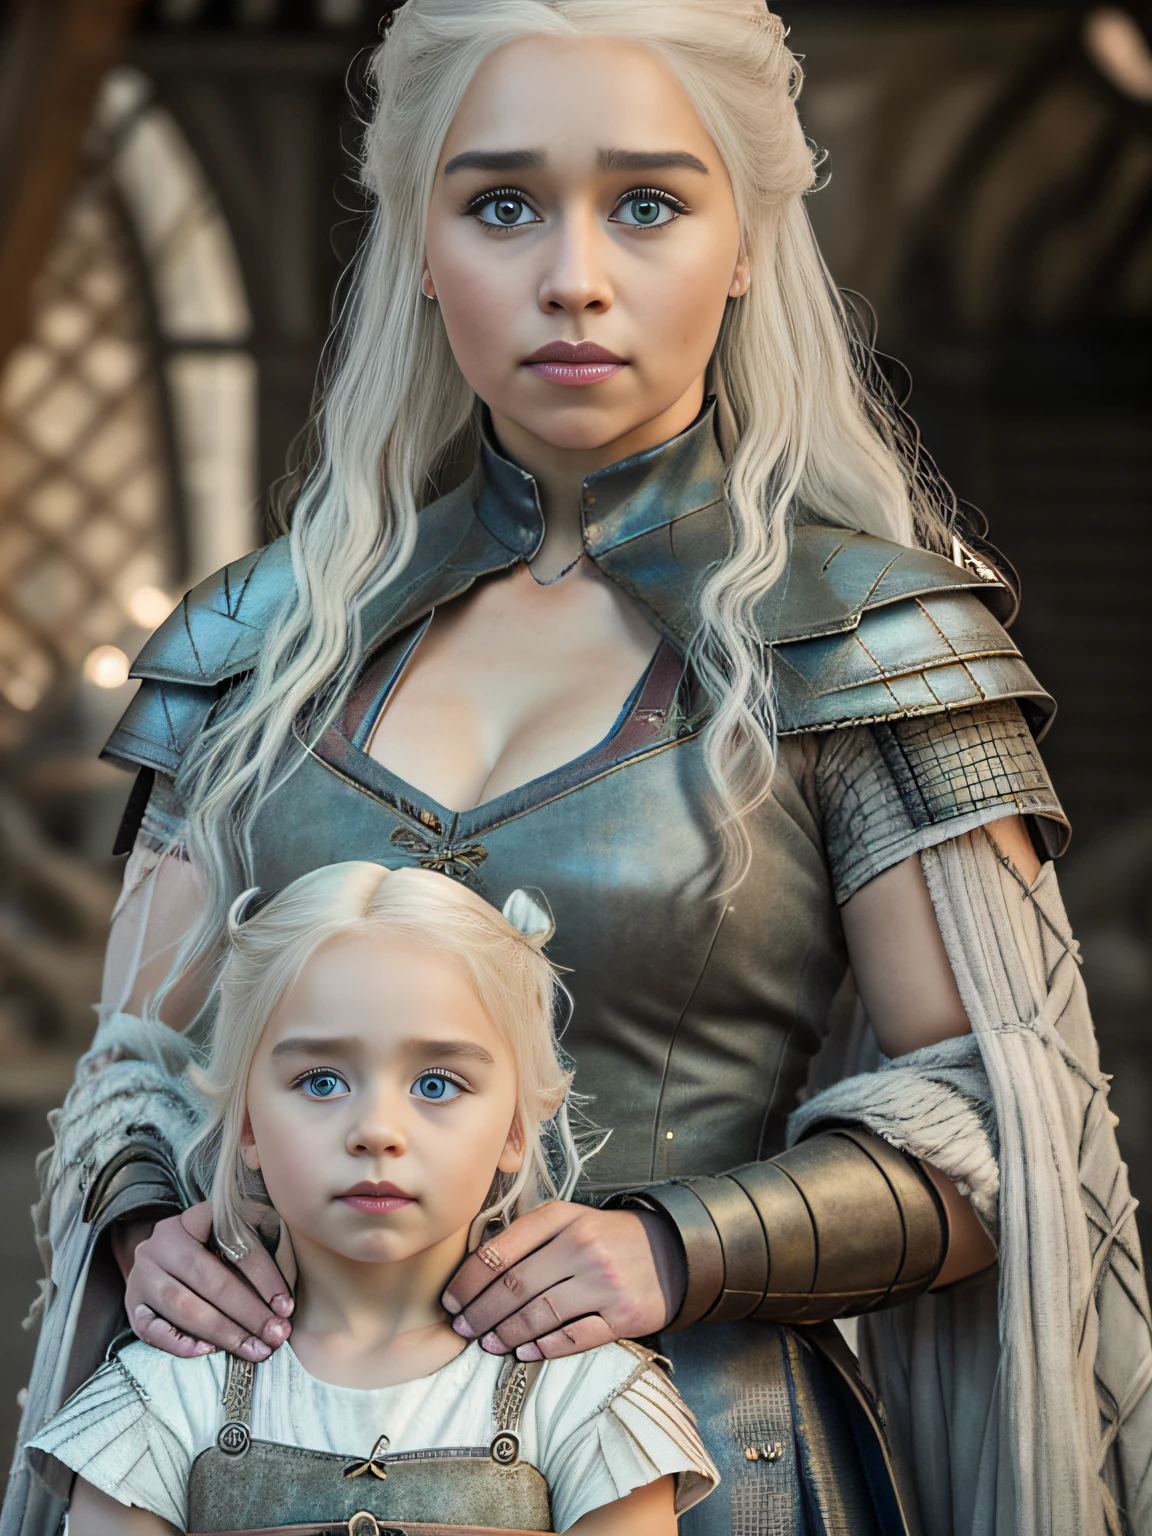 raw full body ((family photo of a father and mother with their daughter)), ((mother carrying daughter)), [1girl, daenerys targaryen, Emilia Clarke], (1man, Henry Cavill as Geralt de Rivia The Witcher), with their ((1girl, 5 year old daughter)))), medieval clothing,((half body shot)), realistic proportions, realistic pupils, ((3 member family portrait)) limited palette, highres, cinematic lighting, 8k resolution, front lit, sunrise, RAW photo, Nikon 85mm, Award Winning, Glamour Photograph, extremely detailed, beautiful Ukrainian, mind-bending, Noth-Yidik, raw fullbody photo of Daenerys Targaryen and Geralt de Rivia The Witcher with 5 year old daughter, highly detailed, artstation, smooth, sharp focus, 8K,, trending on instagram, trending on tumblr, hdr 4k, 8k